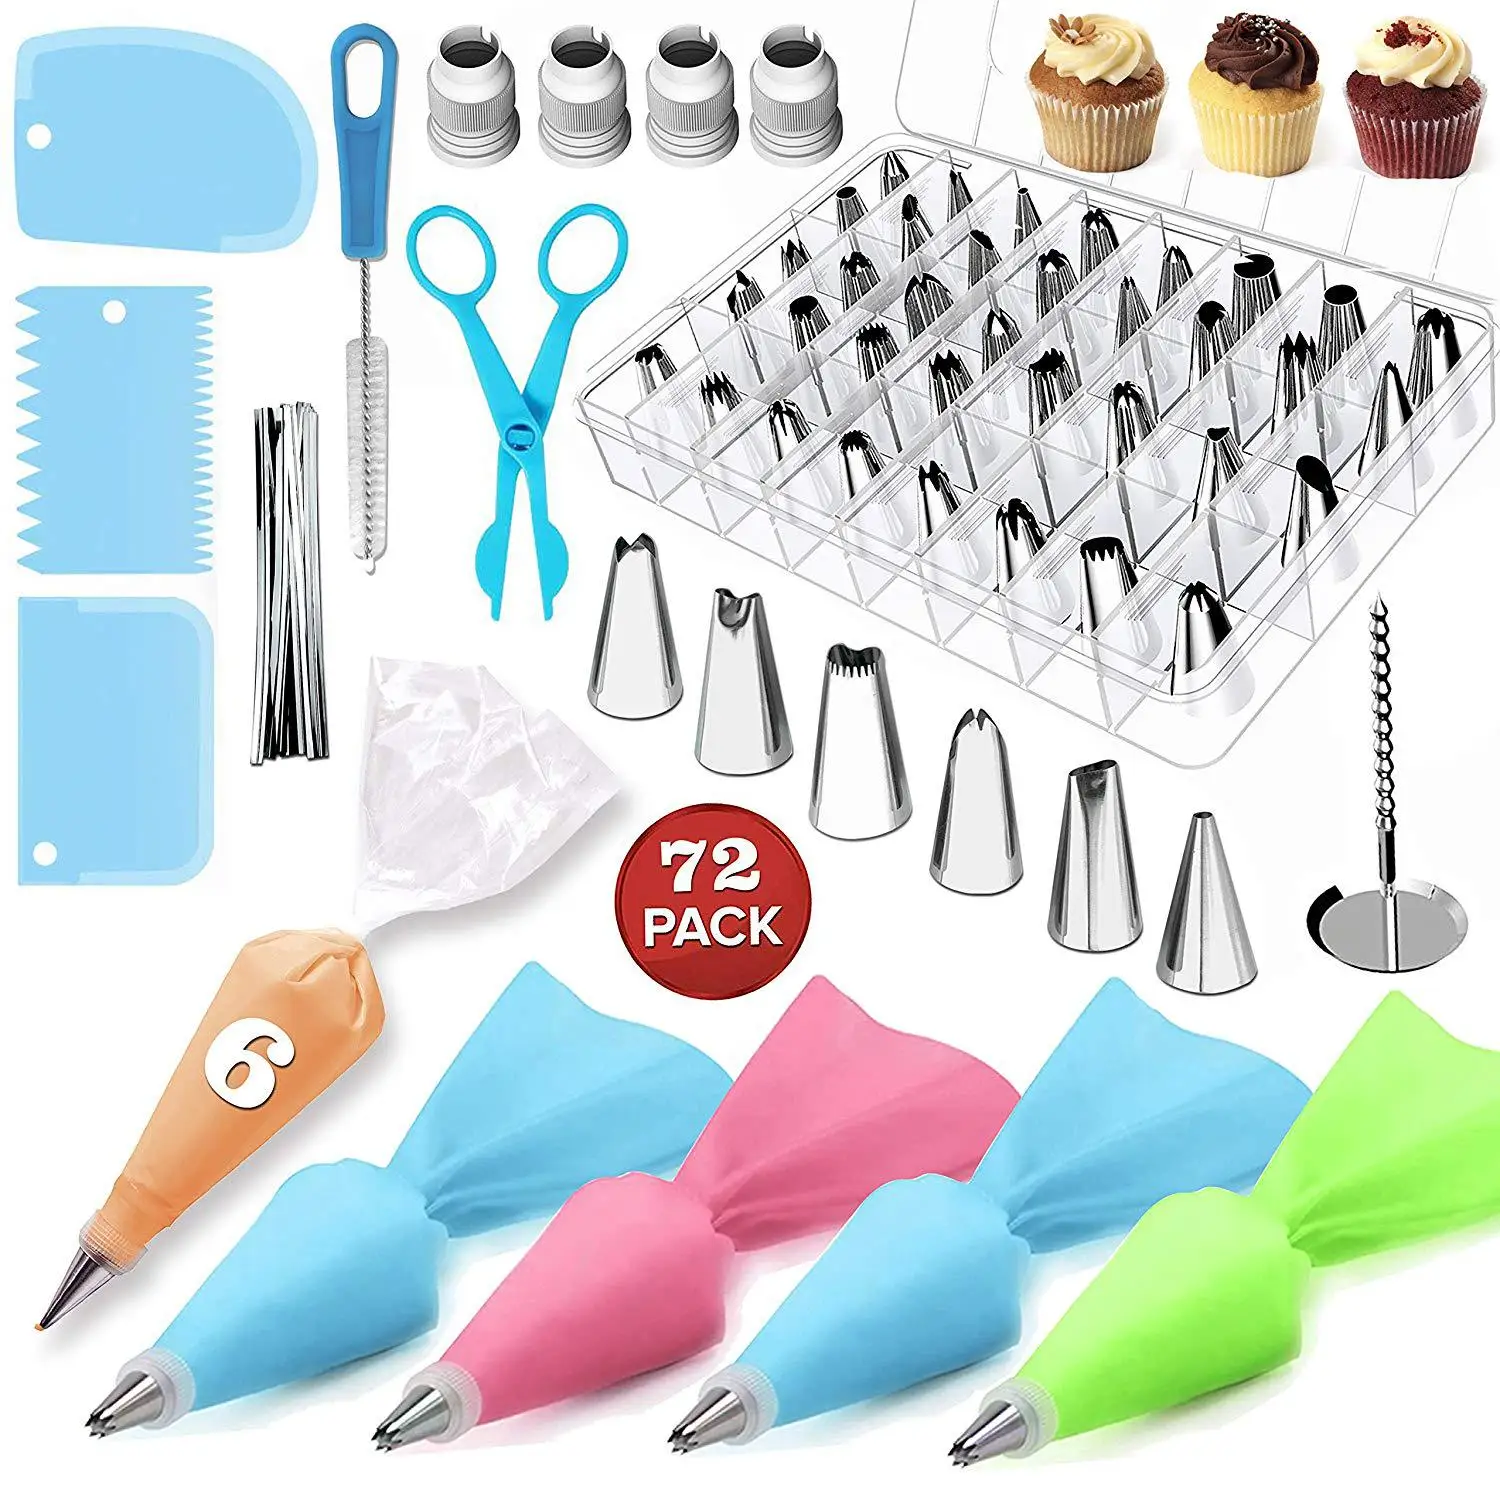 

72 pc/set Cake Decorating Tools,Silicone Pastry Bag Flower Scissor Tray Lifter Fondant Cream Transfer Baking Pastry Kitchen